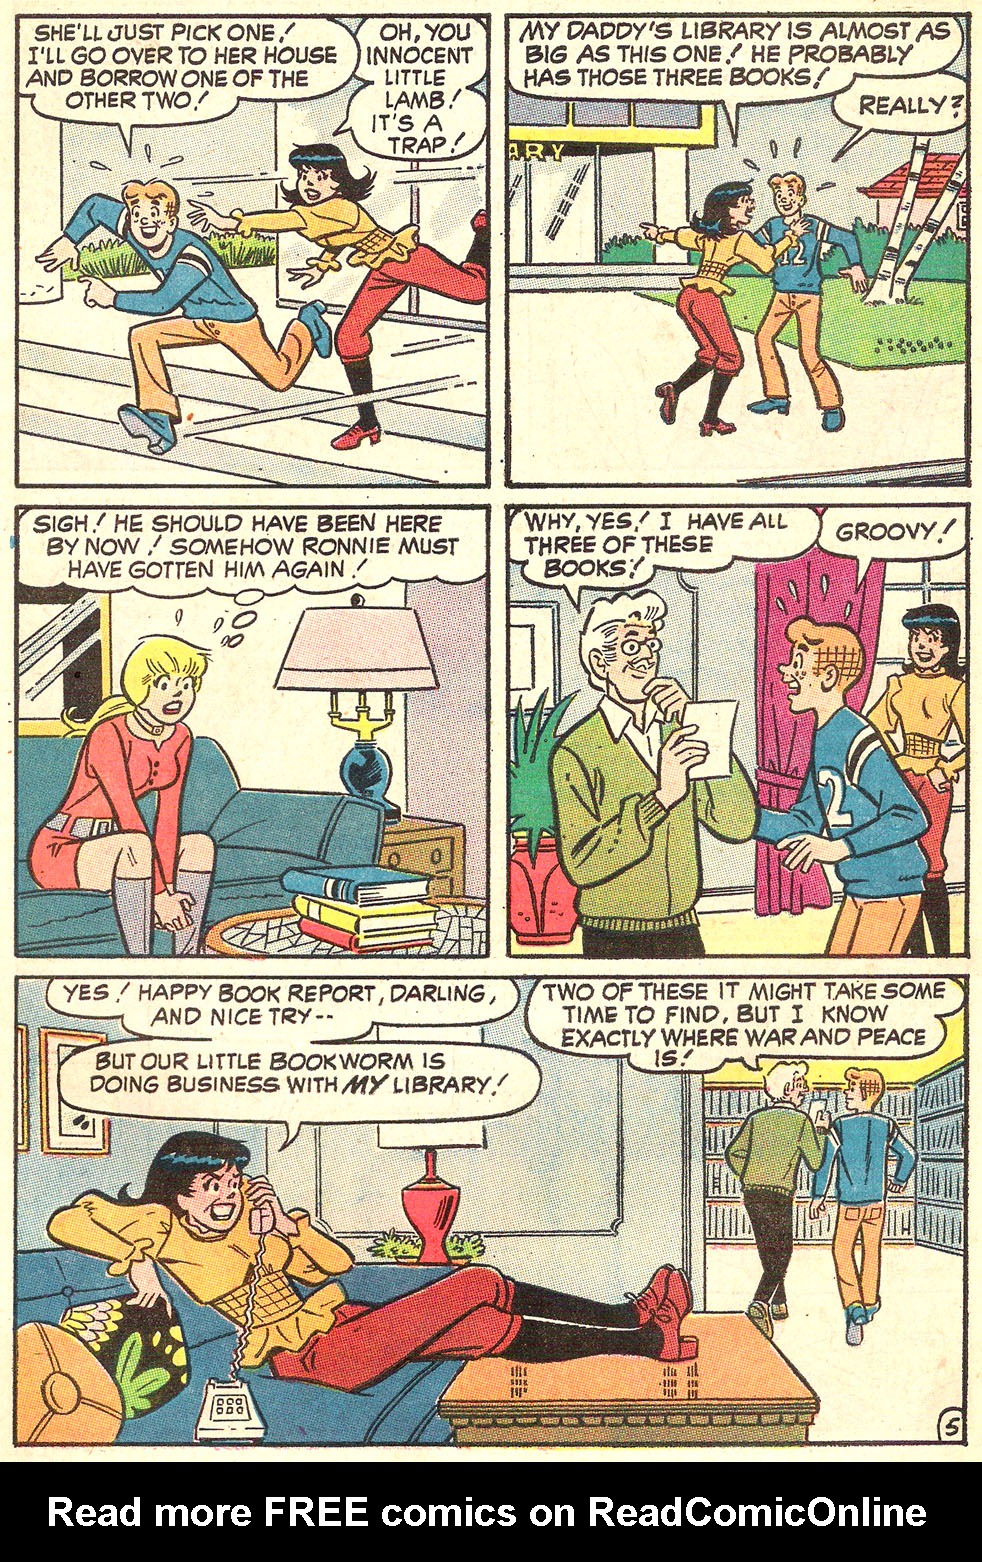 Read online Archie's Girls Betty and Veronica comic -  Issue #186 - 7